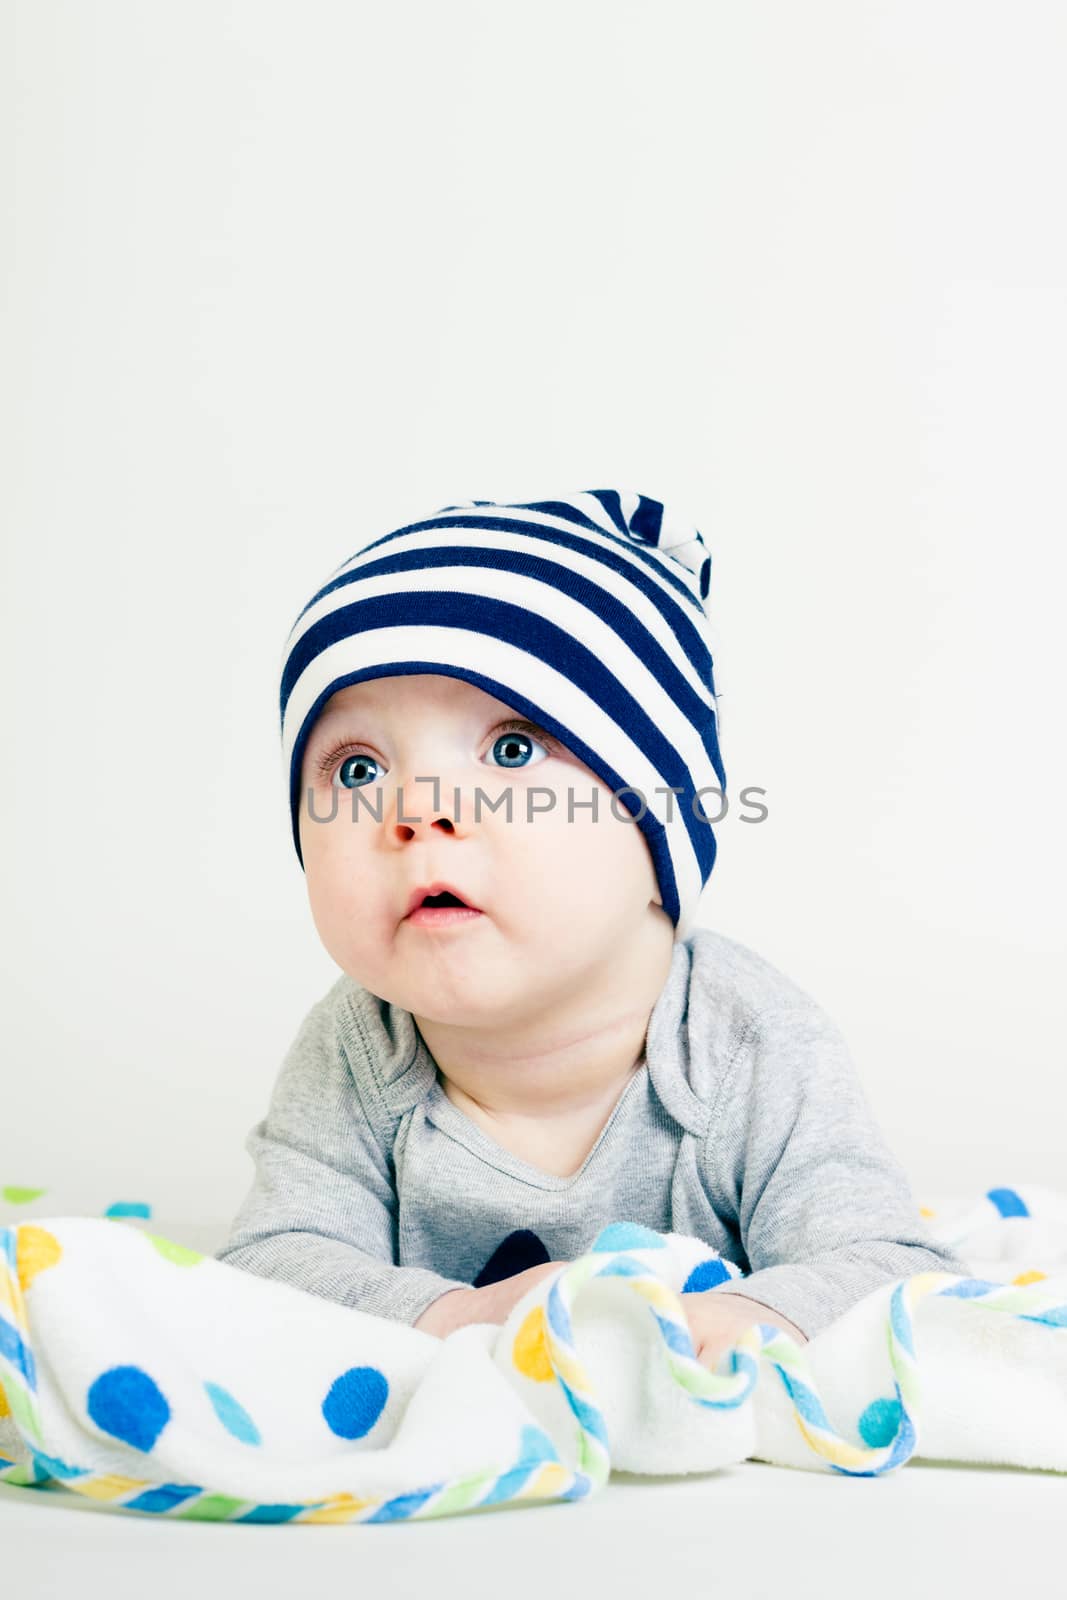 Portrait of a cute baby in striped hat lying down on a blanket